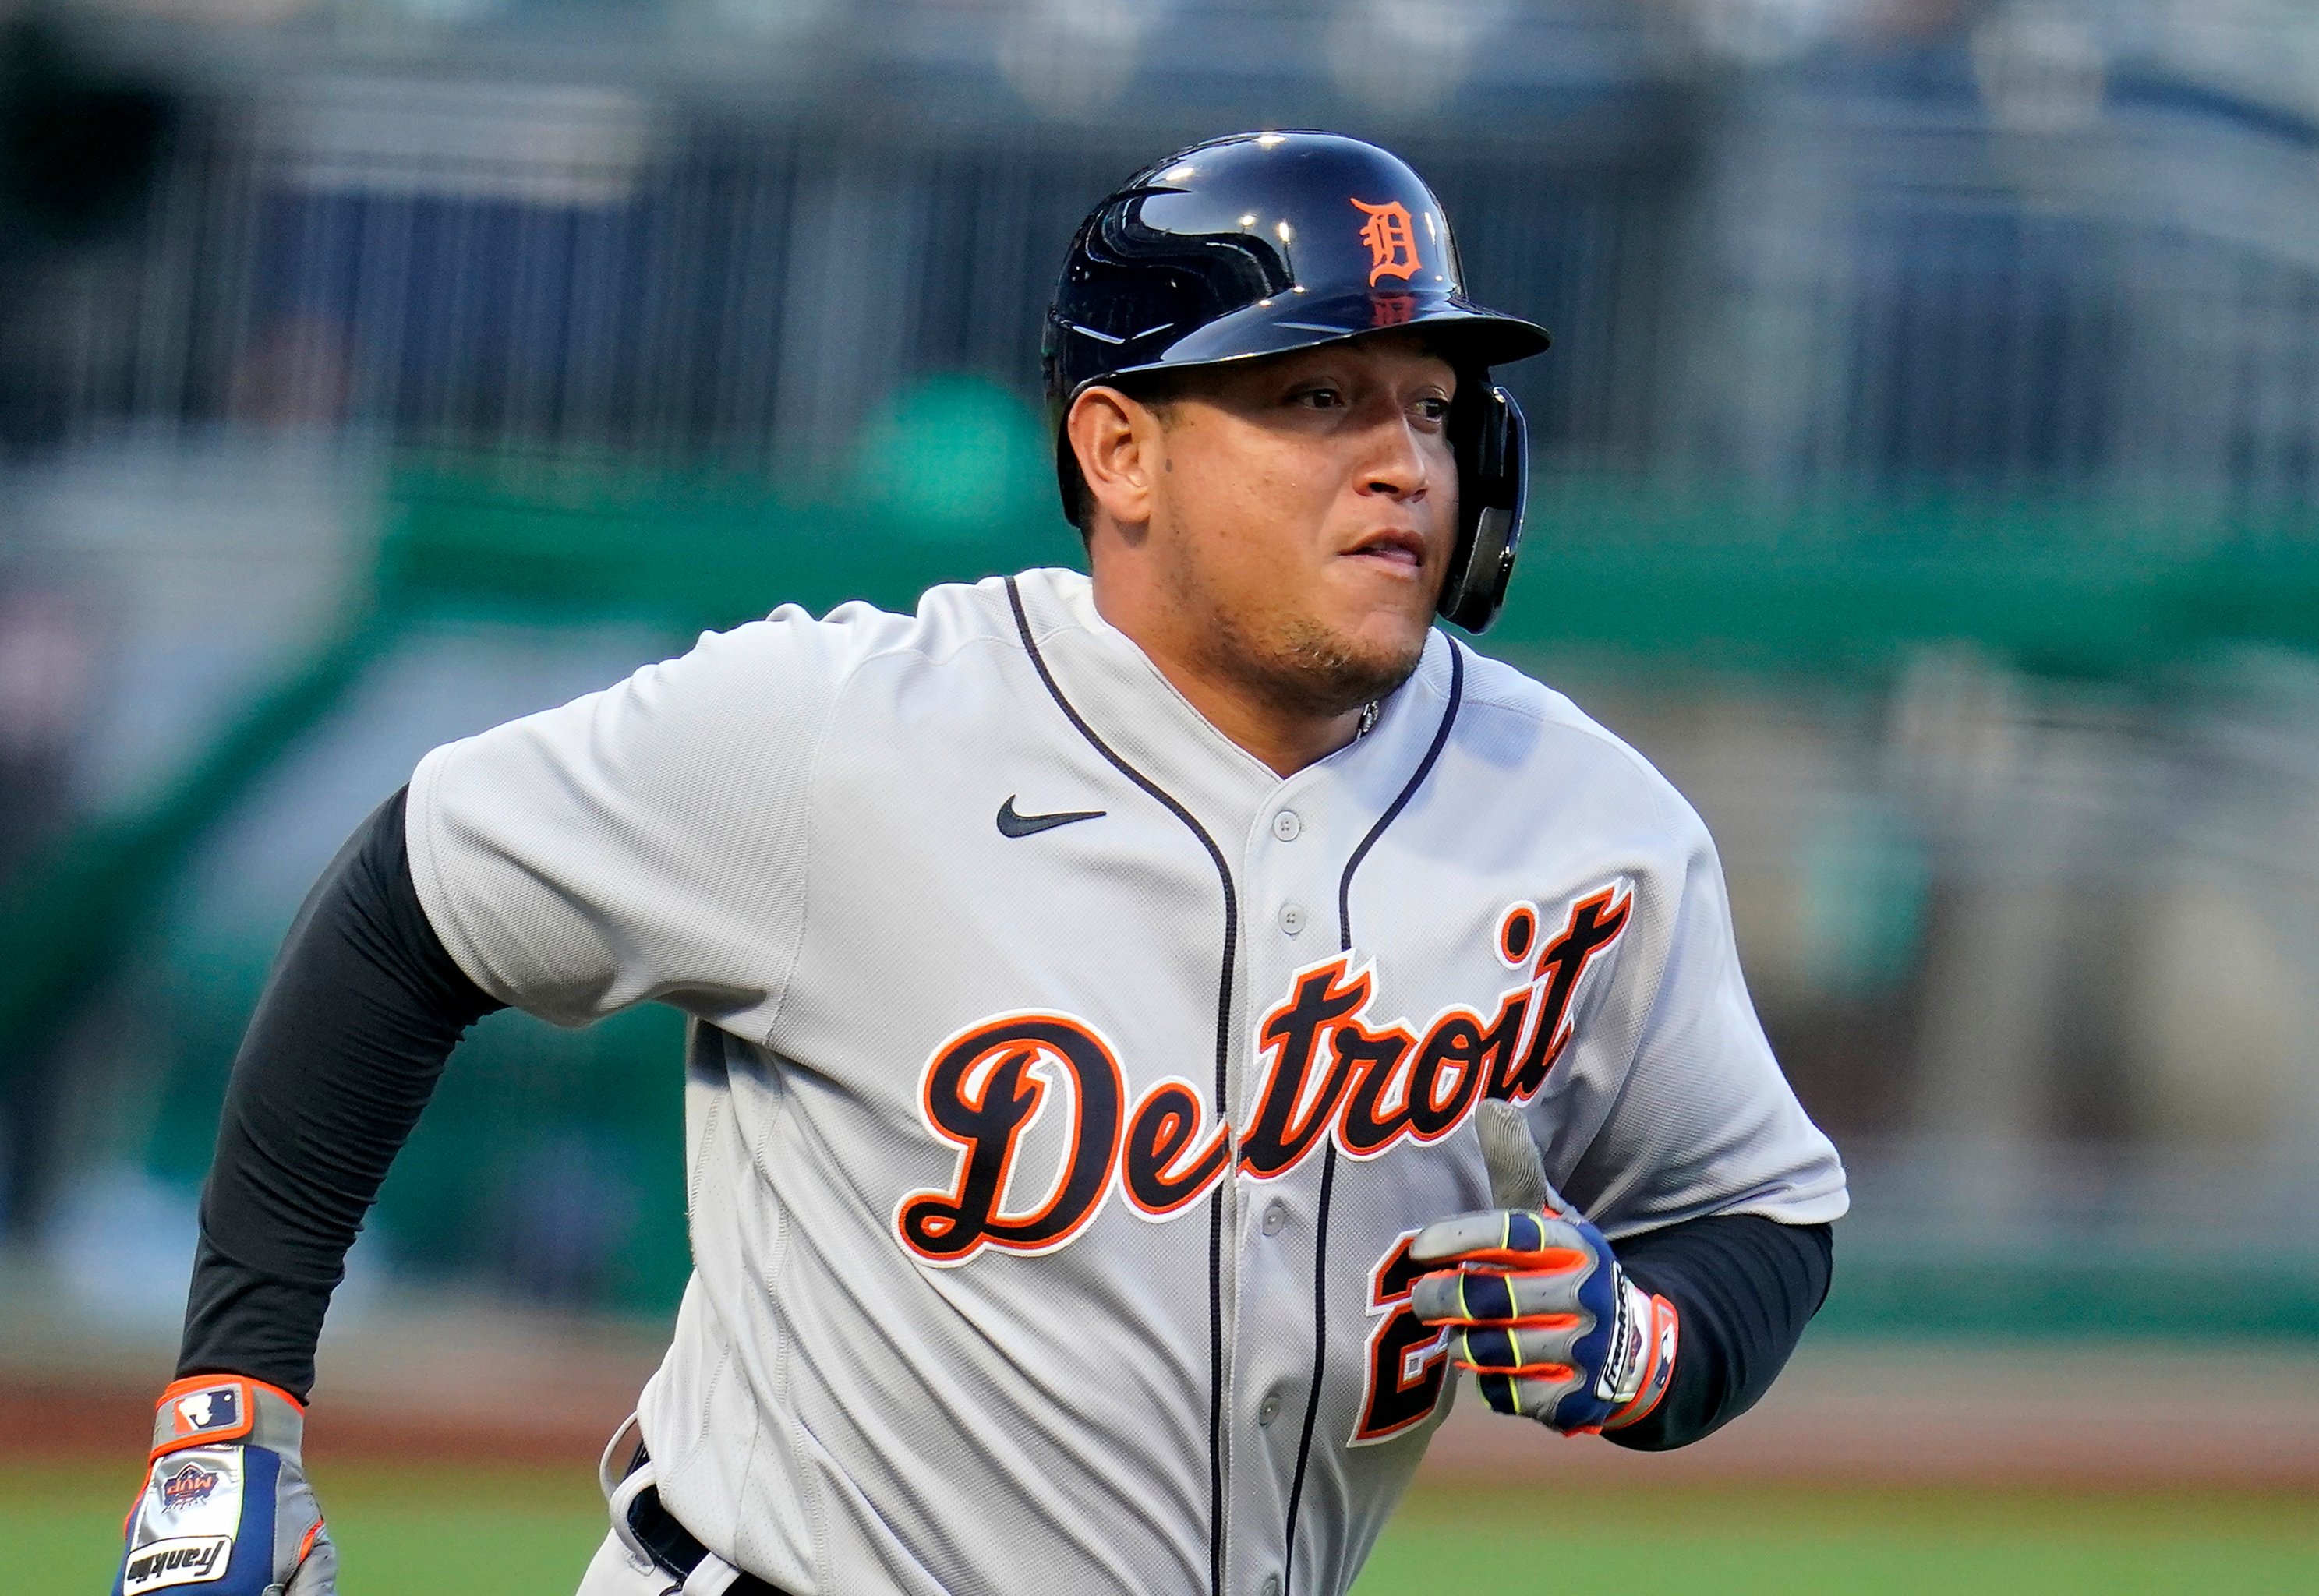 Tigers' Cabrera worth his weight in millions